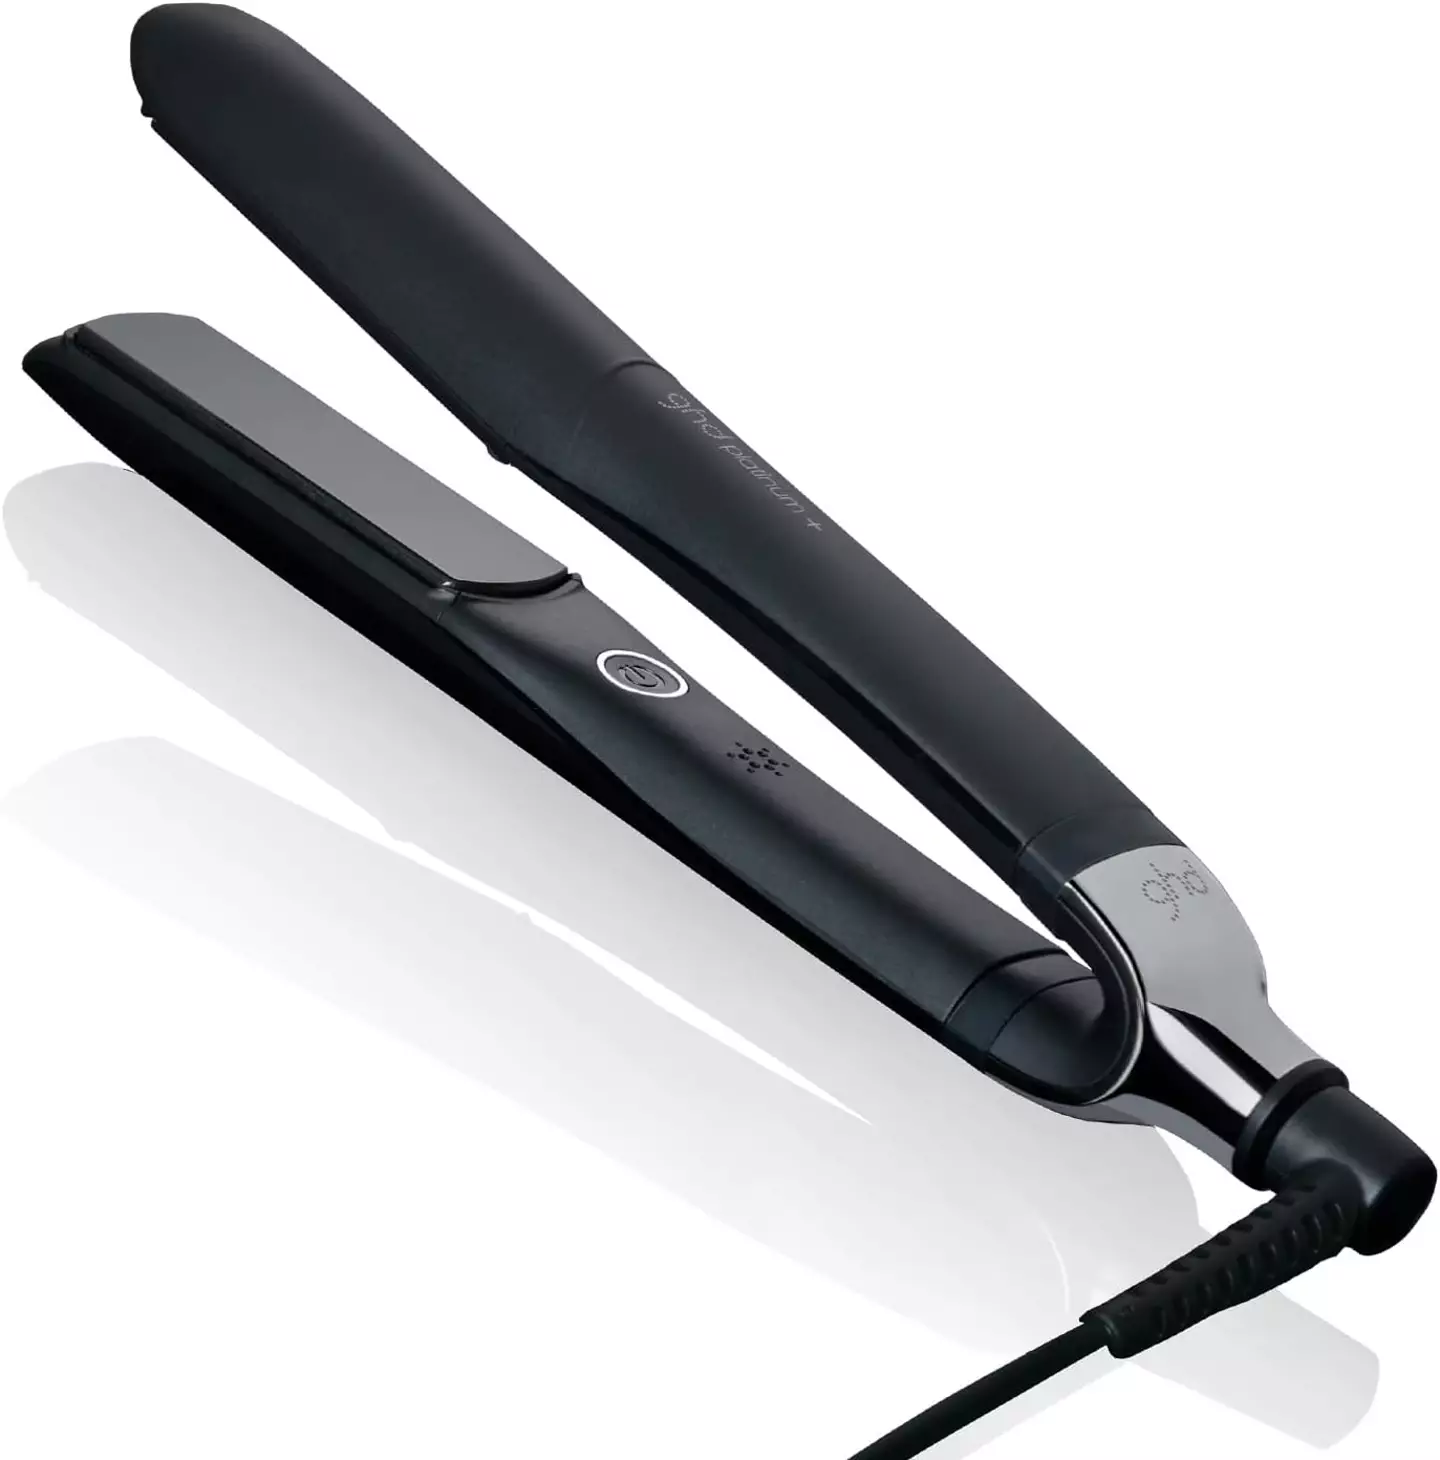 There's £48 off the Platinum+ styler in the spring sale.